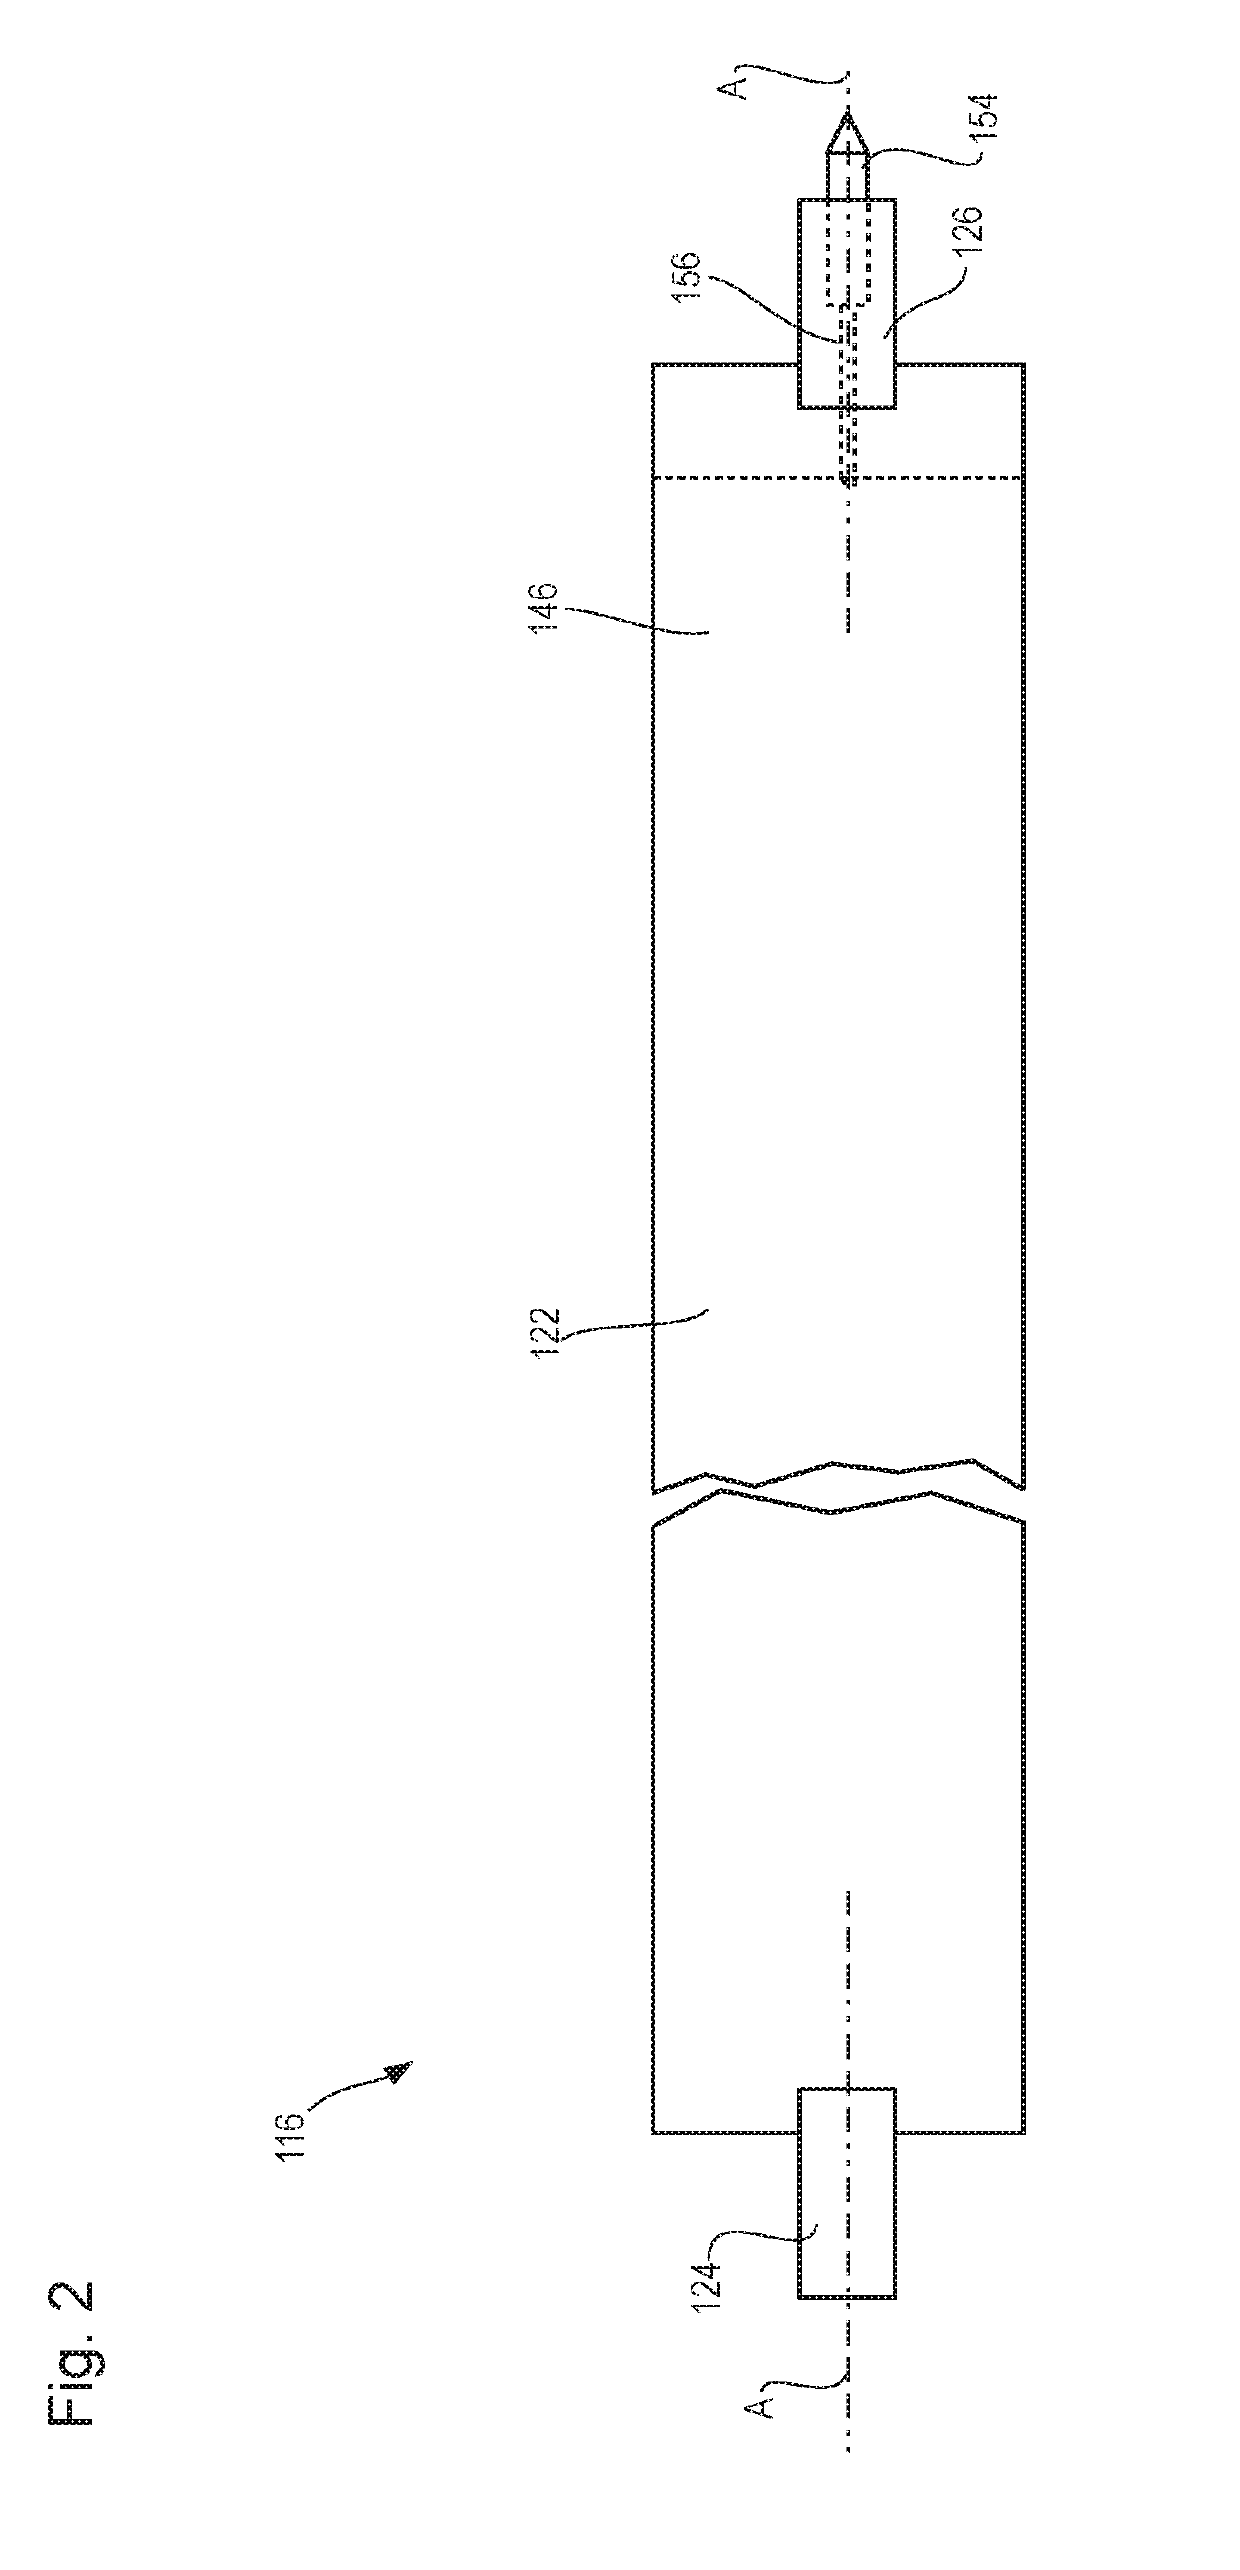 Air flap apparatus having an air flap constituted at least in portions from electrically conductive plastic for electrical heating thereof